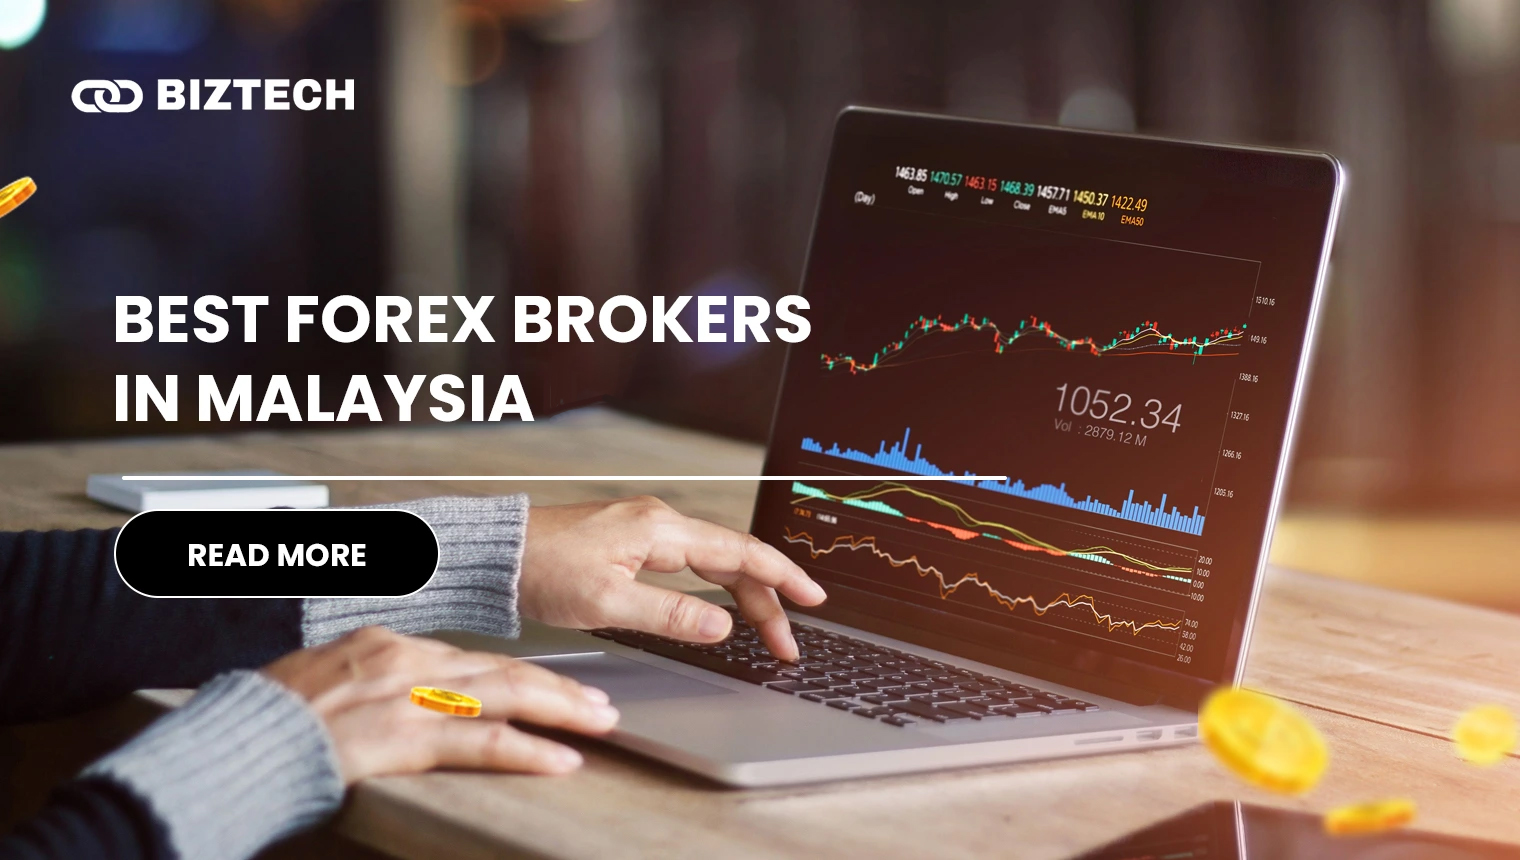 Best Forex Brokers in Malaysia